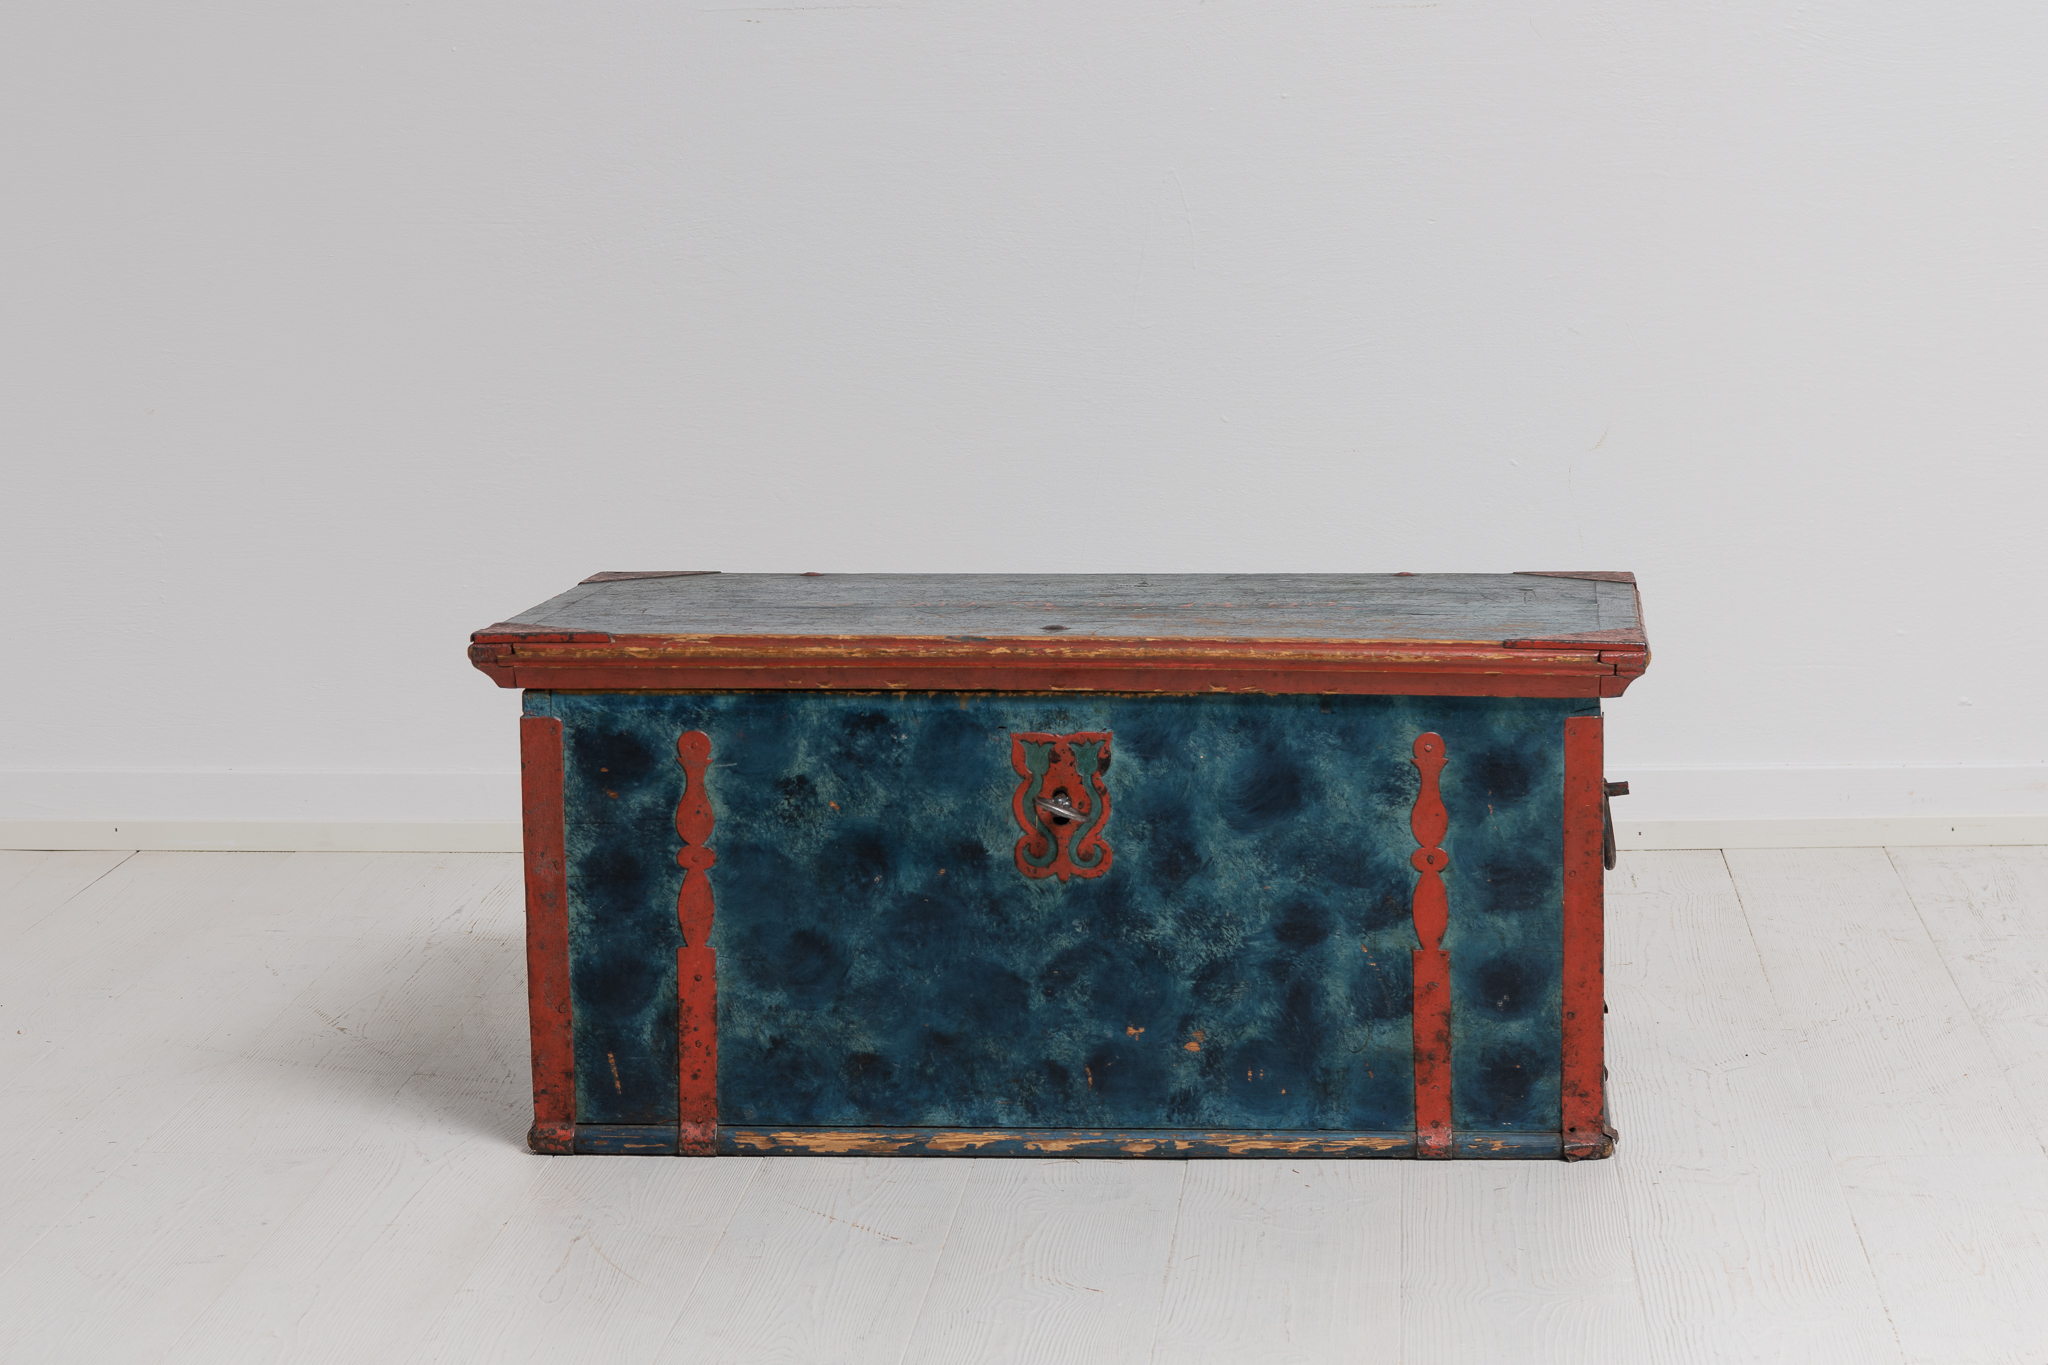 Blue folk art chest made in Swedish pine. The chest from northern Sweden and has hand wrought reinforcements in iron